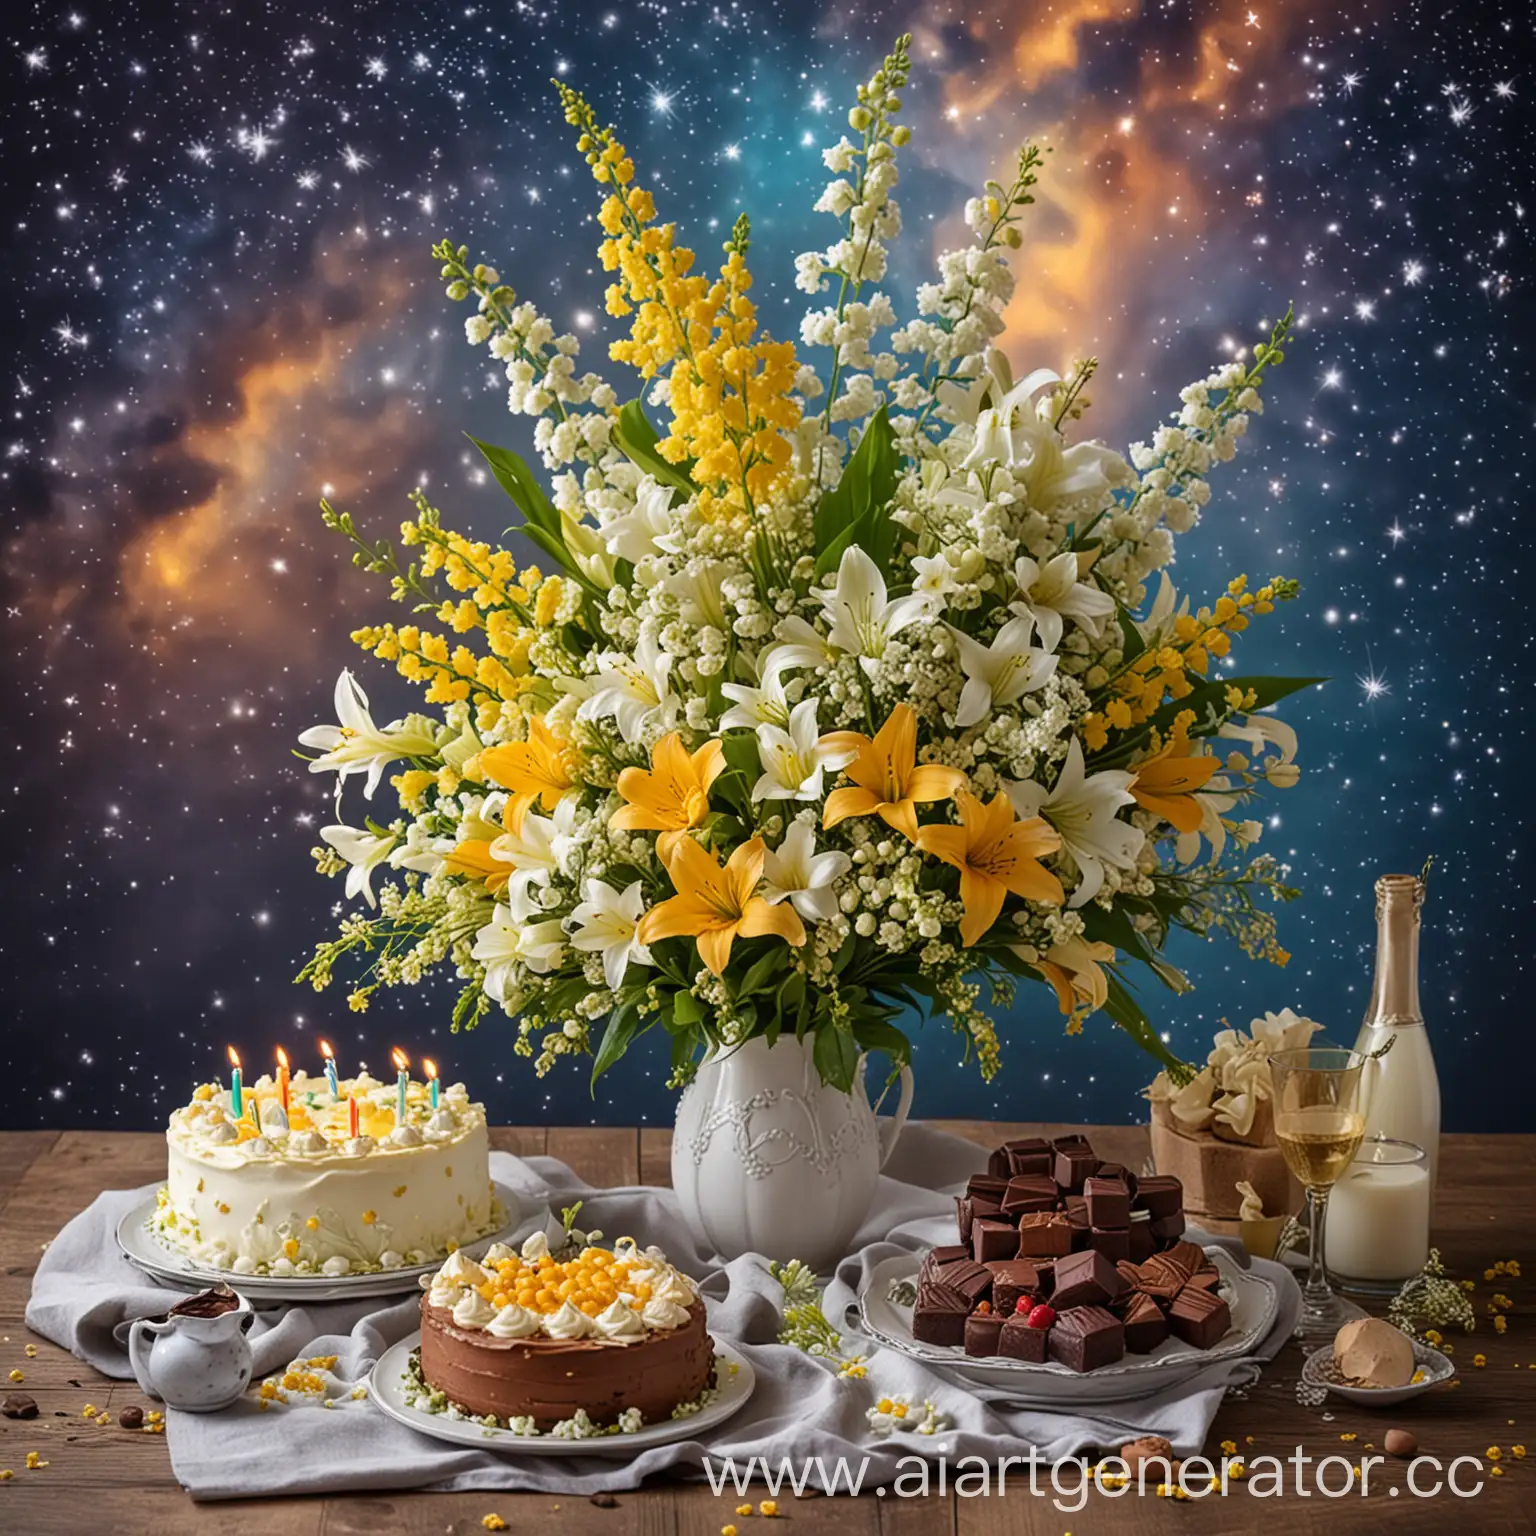 Celebratory-Bouquet-with-Cake-and-Sweets-Under-a-Starlit-Sky